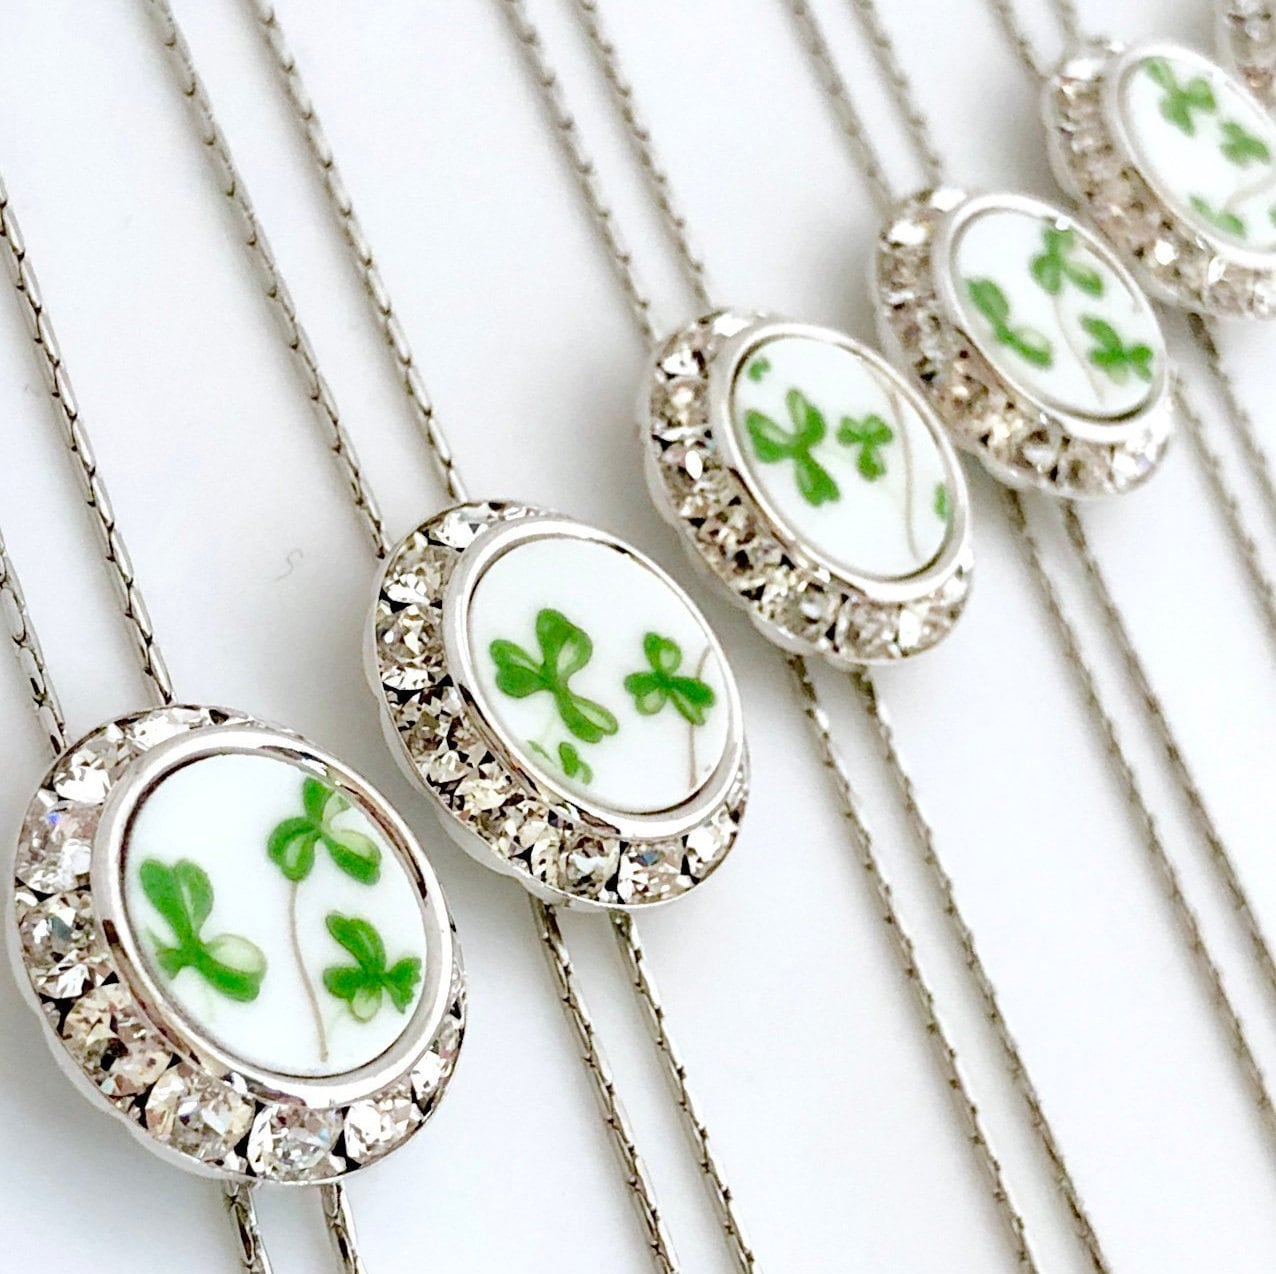 Irish Royal Tara Lariat, Broken China Jewelry Celtic Necklace, Adjustable Bolo Necklace, Unique Gifts for Women, Gifts for Women